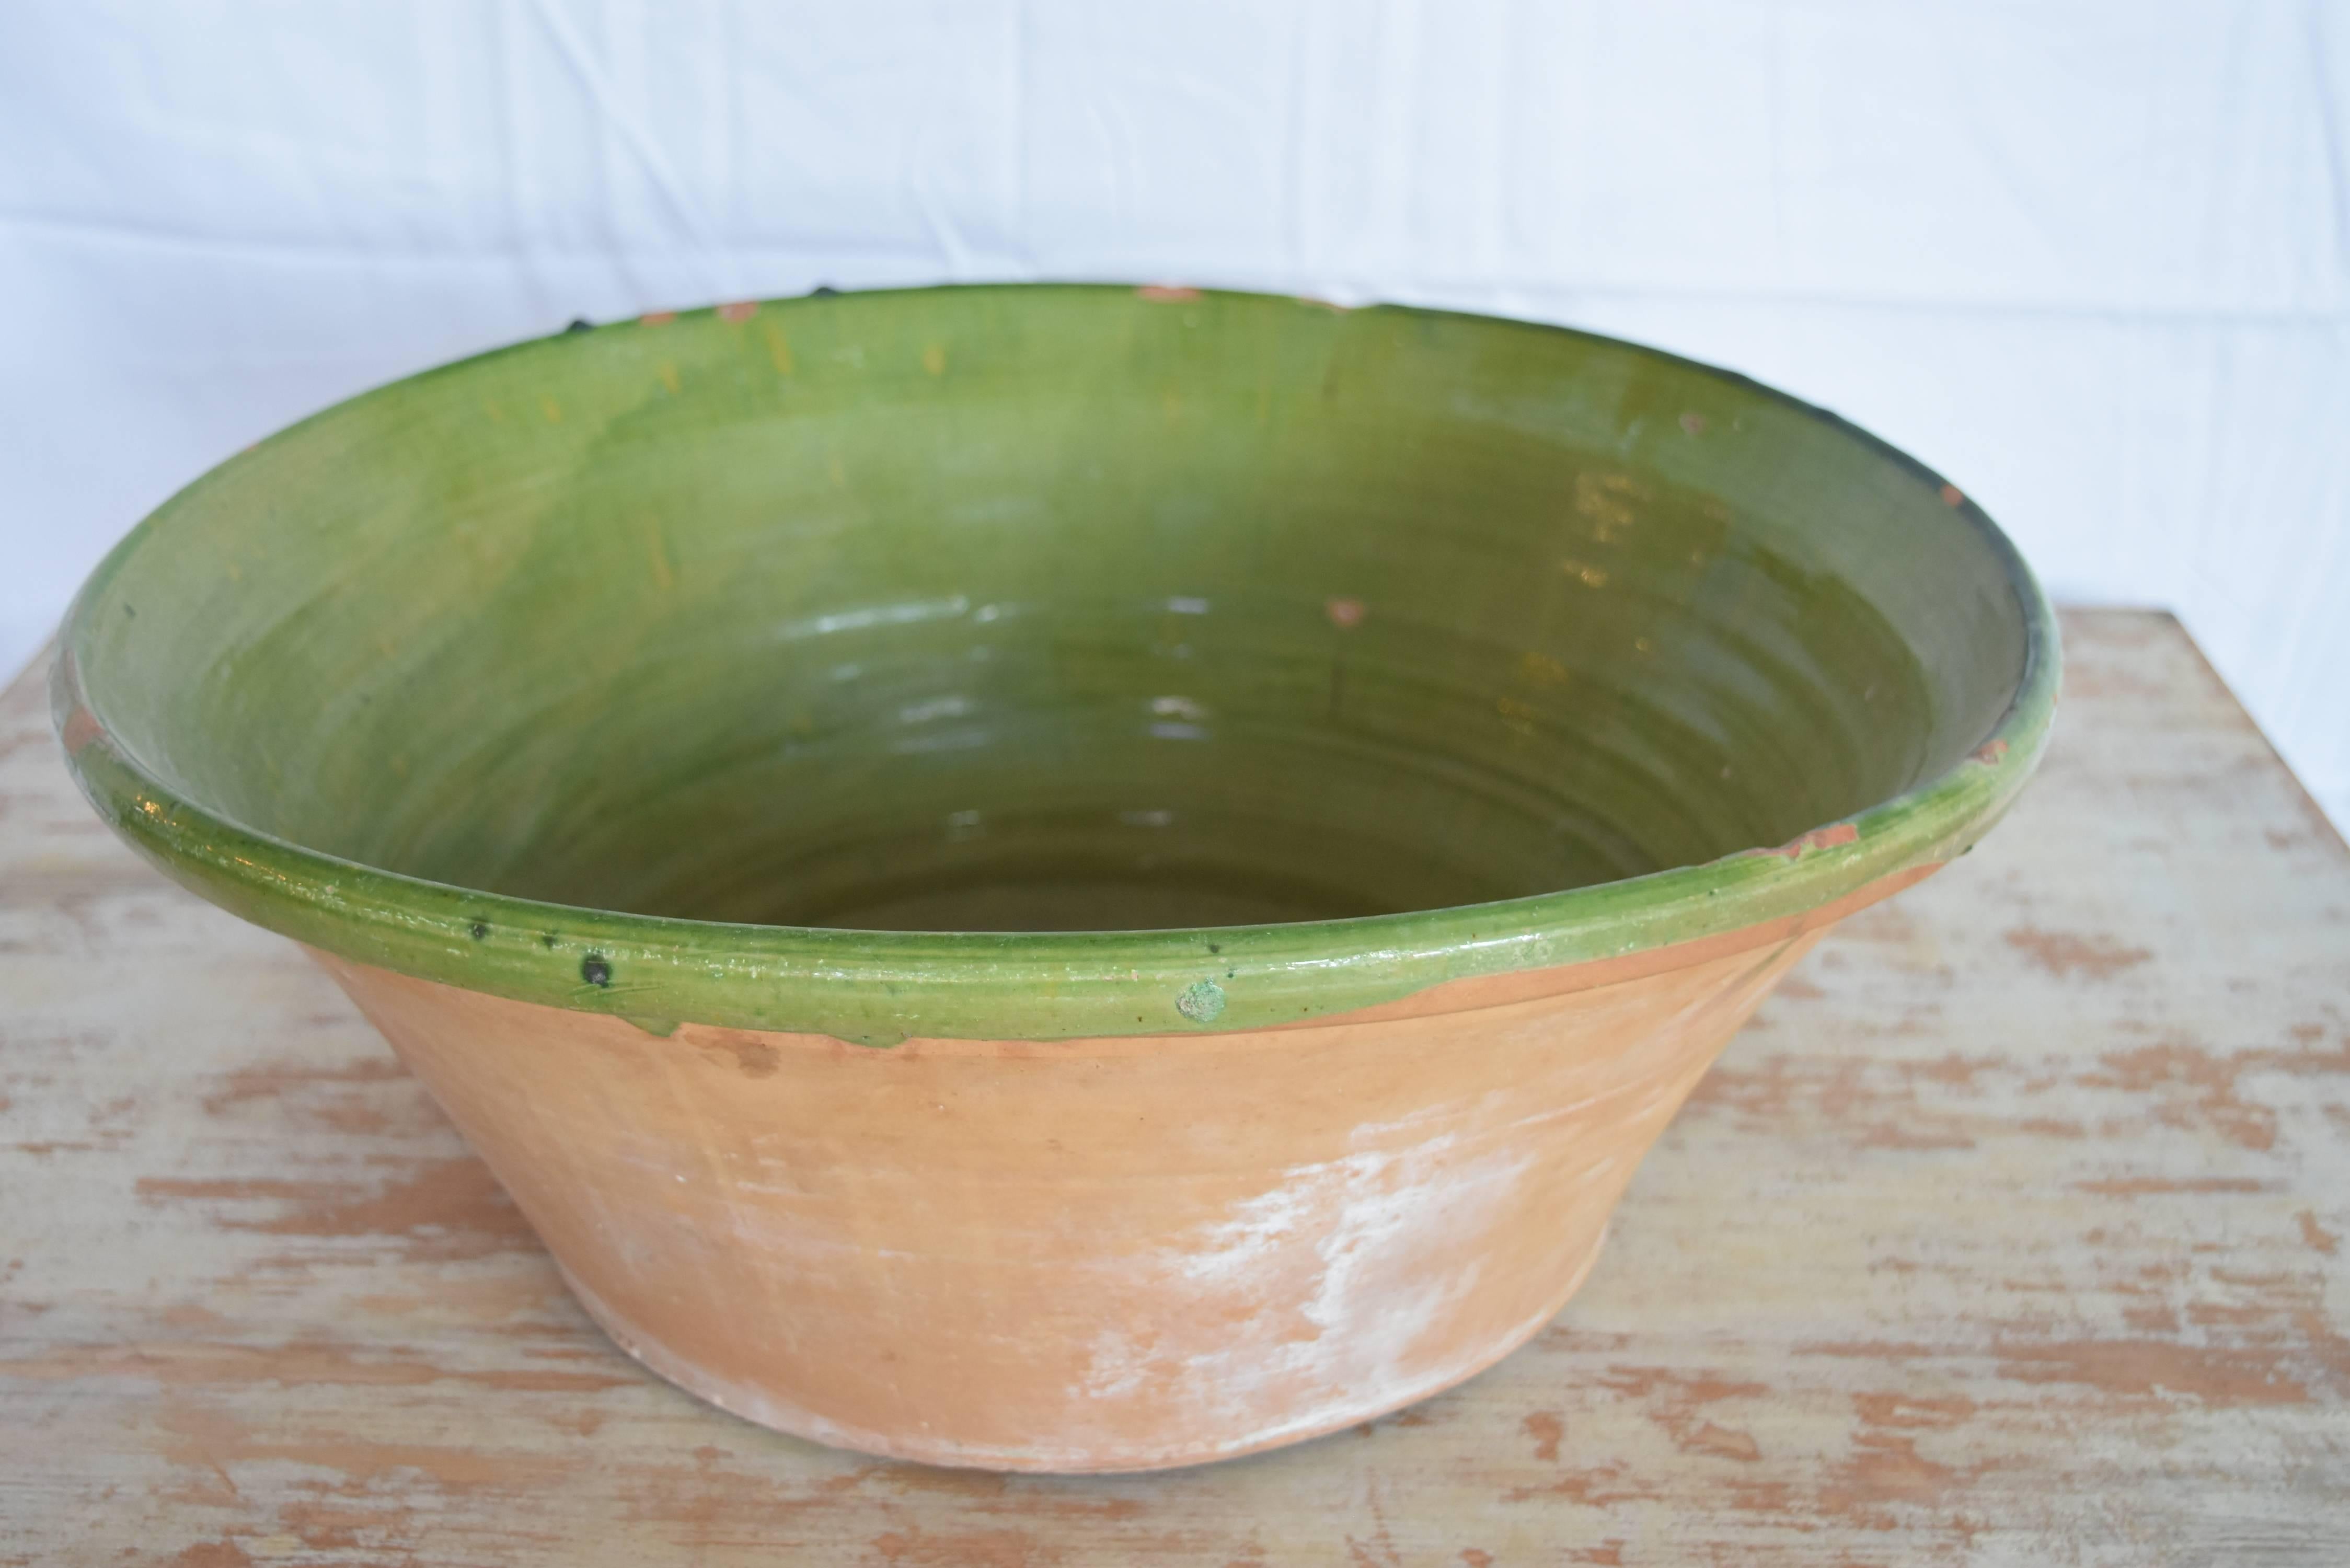 This is a pretty green color terracotta bowl that originated in the Catalonia region of Spain. It shows a few minor chips but is in very good condition.